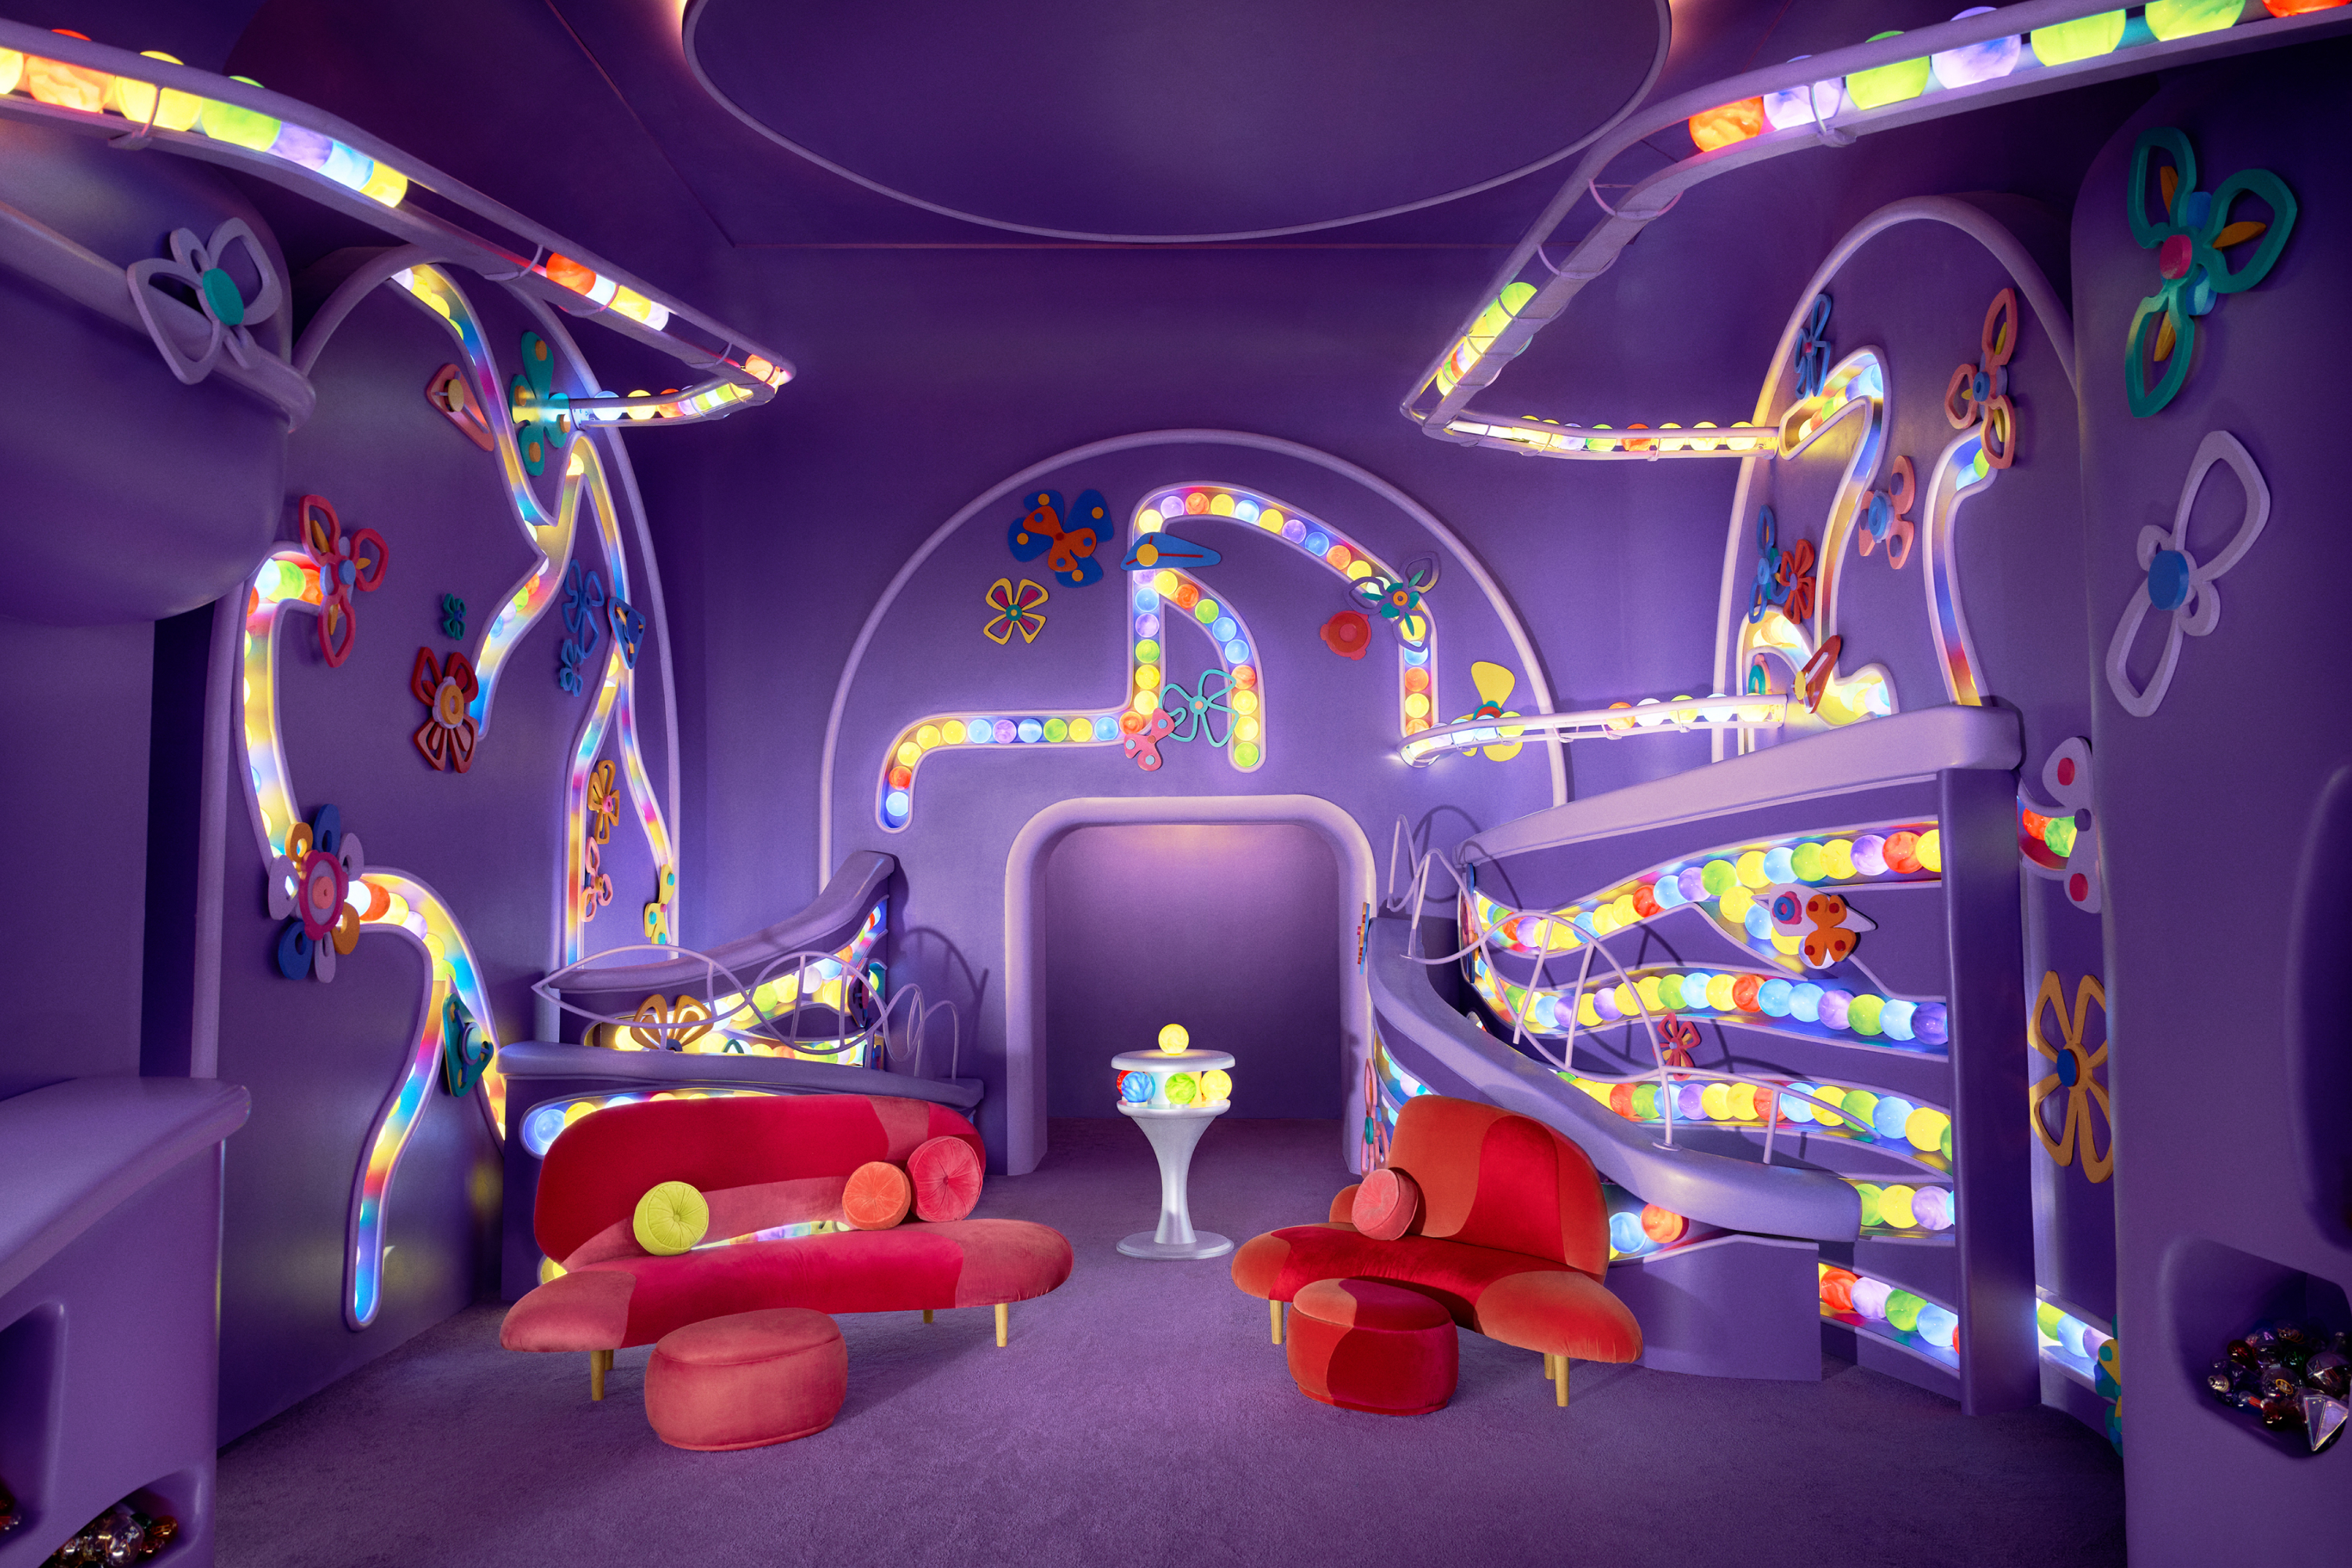 Purple room that has tubes running along the walls filled with green, blue, yellow, purple, and red balls. In the center of the room stand two modern red couches and a pedestal containing the bright colored balls in a ring near the top with a single yellow ball on top.